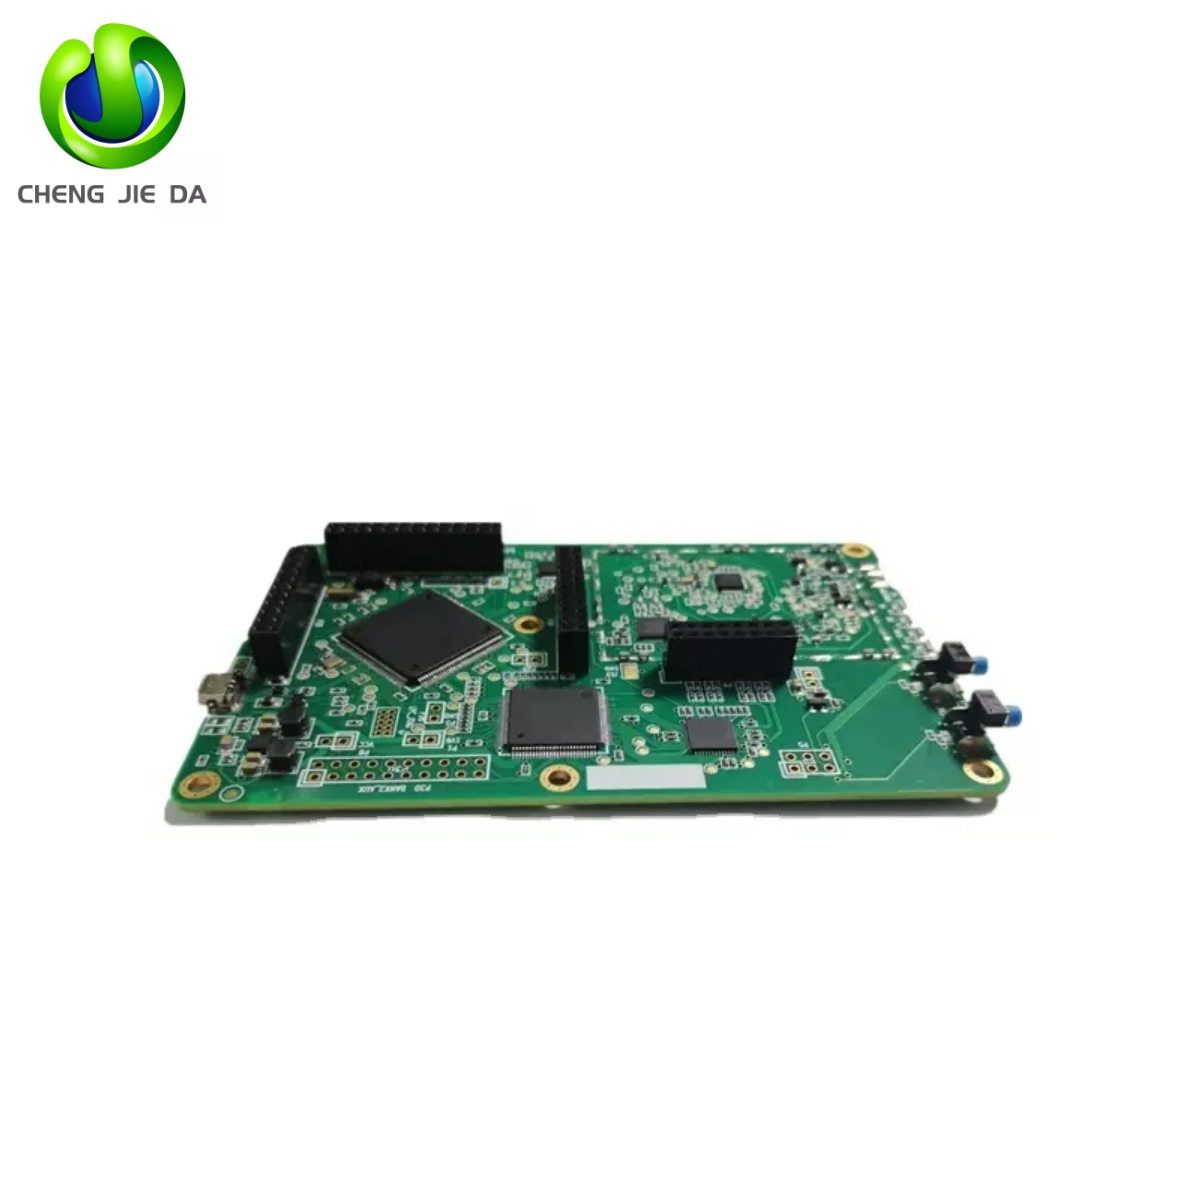 High quality oem odm mother board, main board of project pcb pcba making service